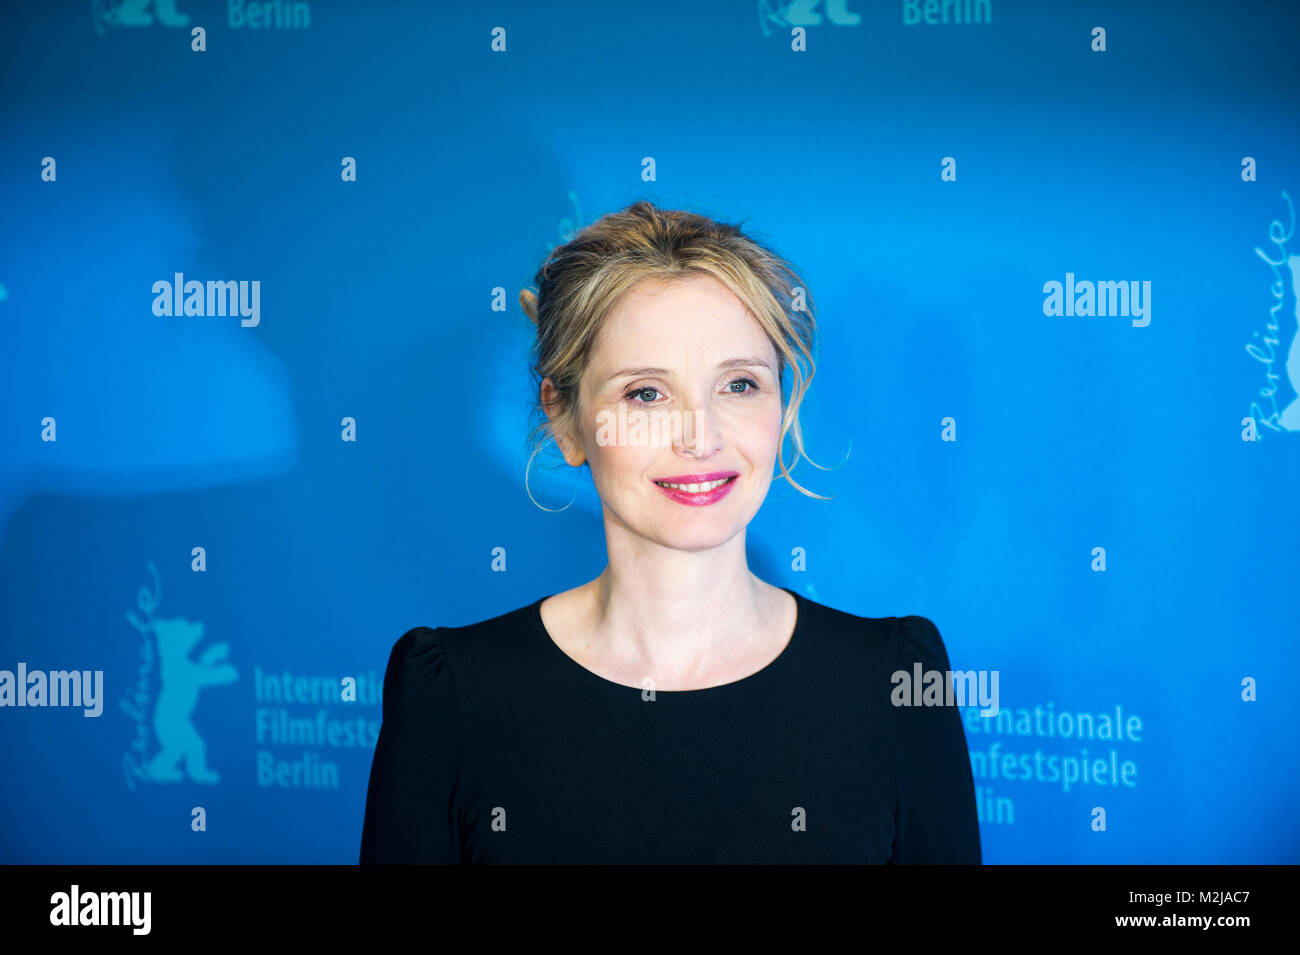 63rd Berlinale: International Film Festival in Berlin, with Richard Linklater movie, “Before Midnight” the actors of the movie are Julie Delpy, Ethan Hawke. Stock Photo